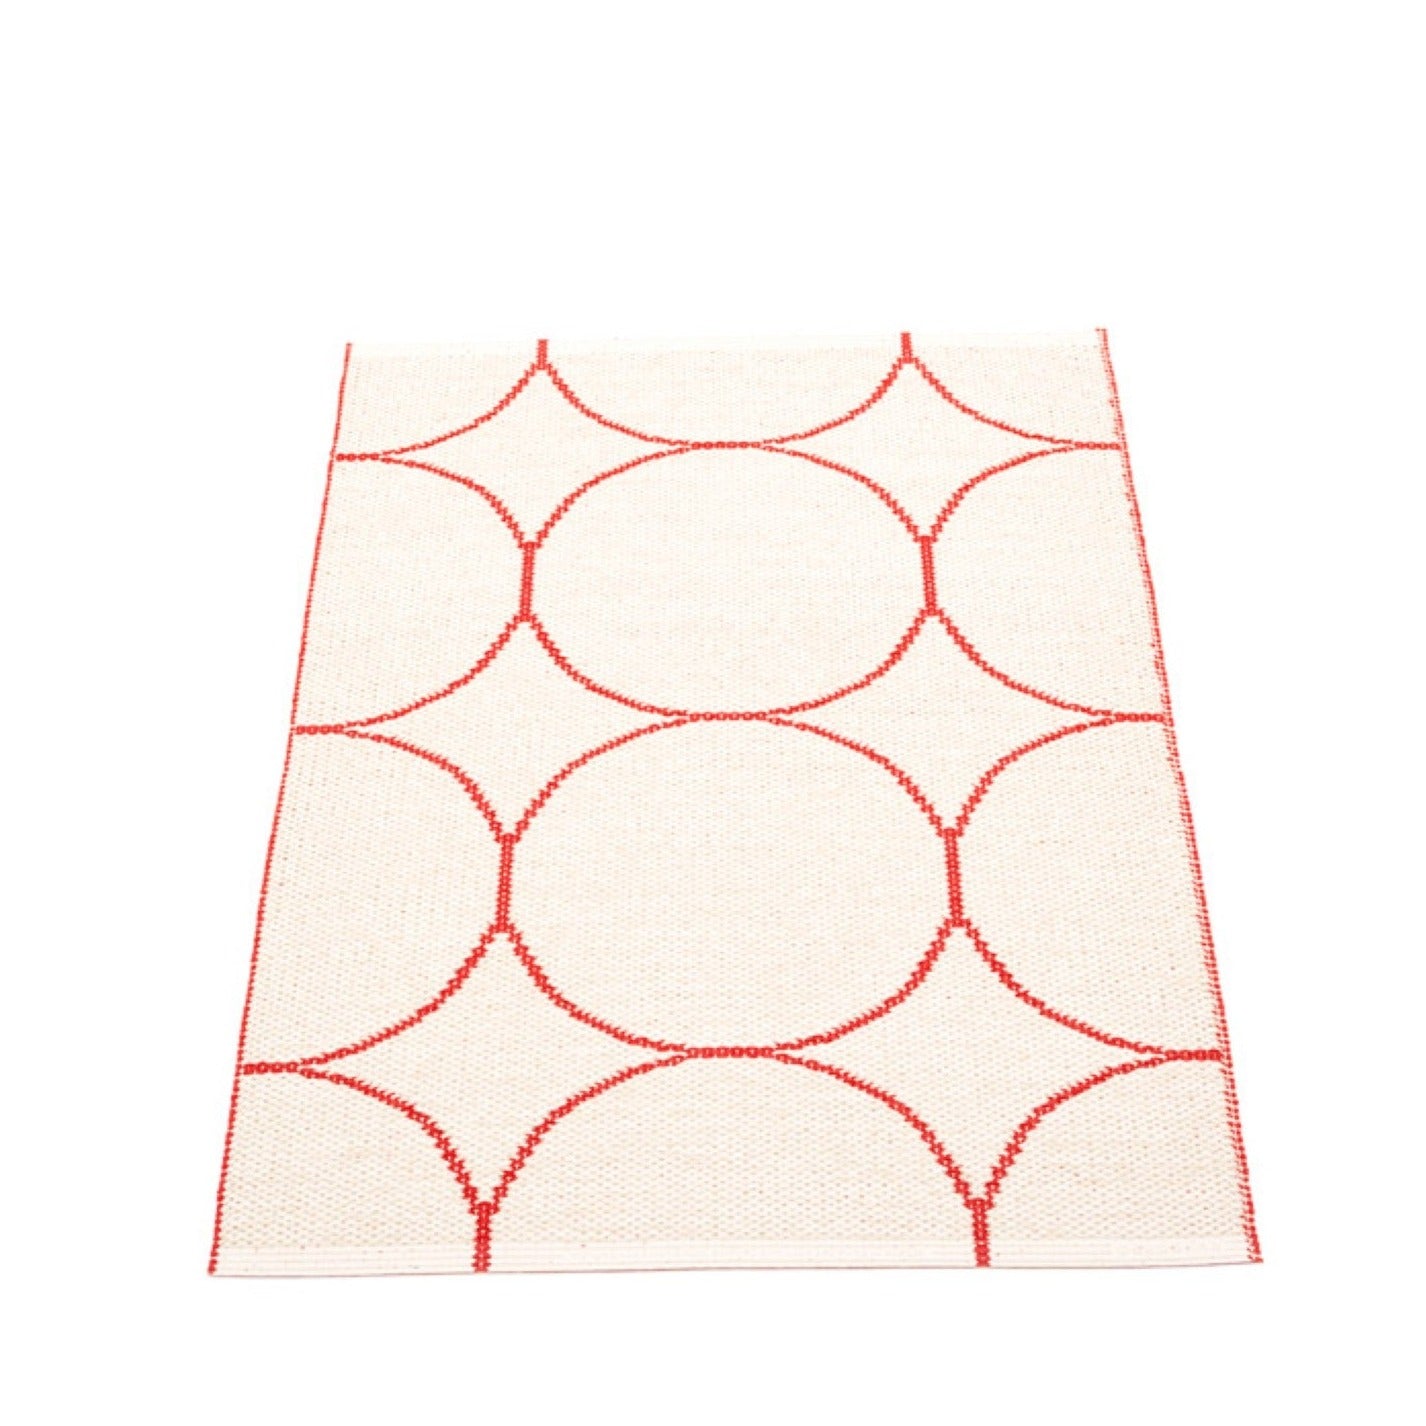 Boo Rug - Red